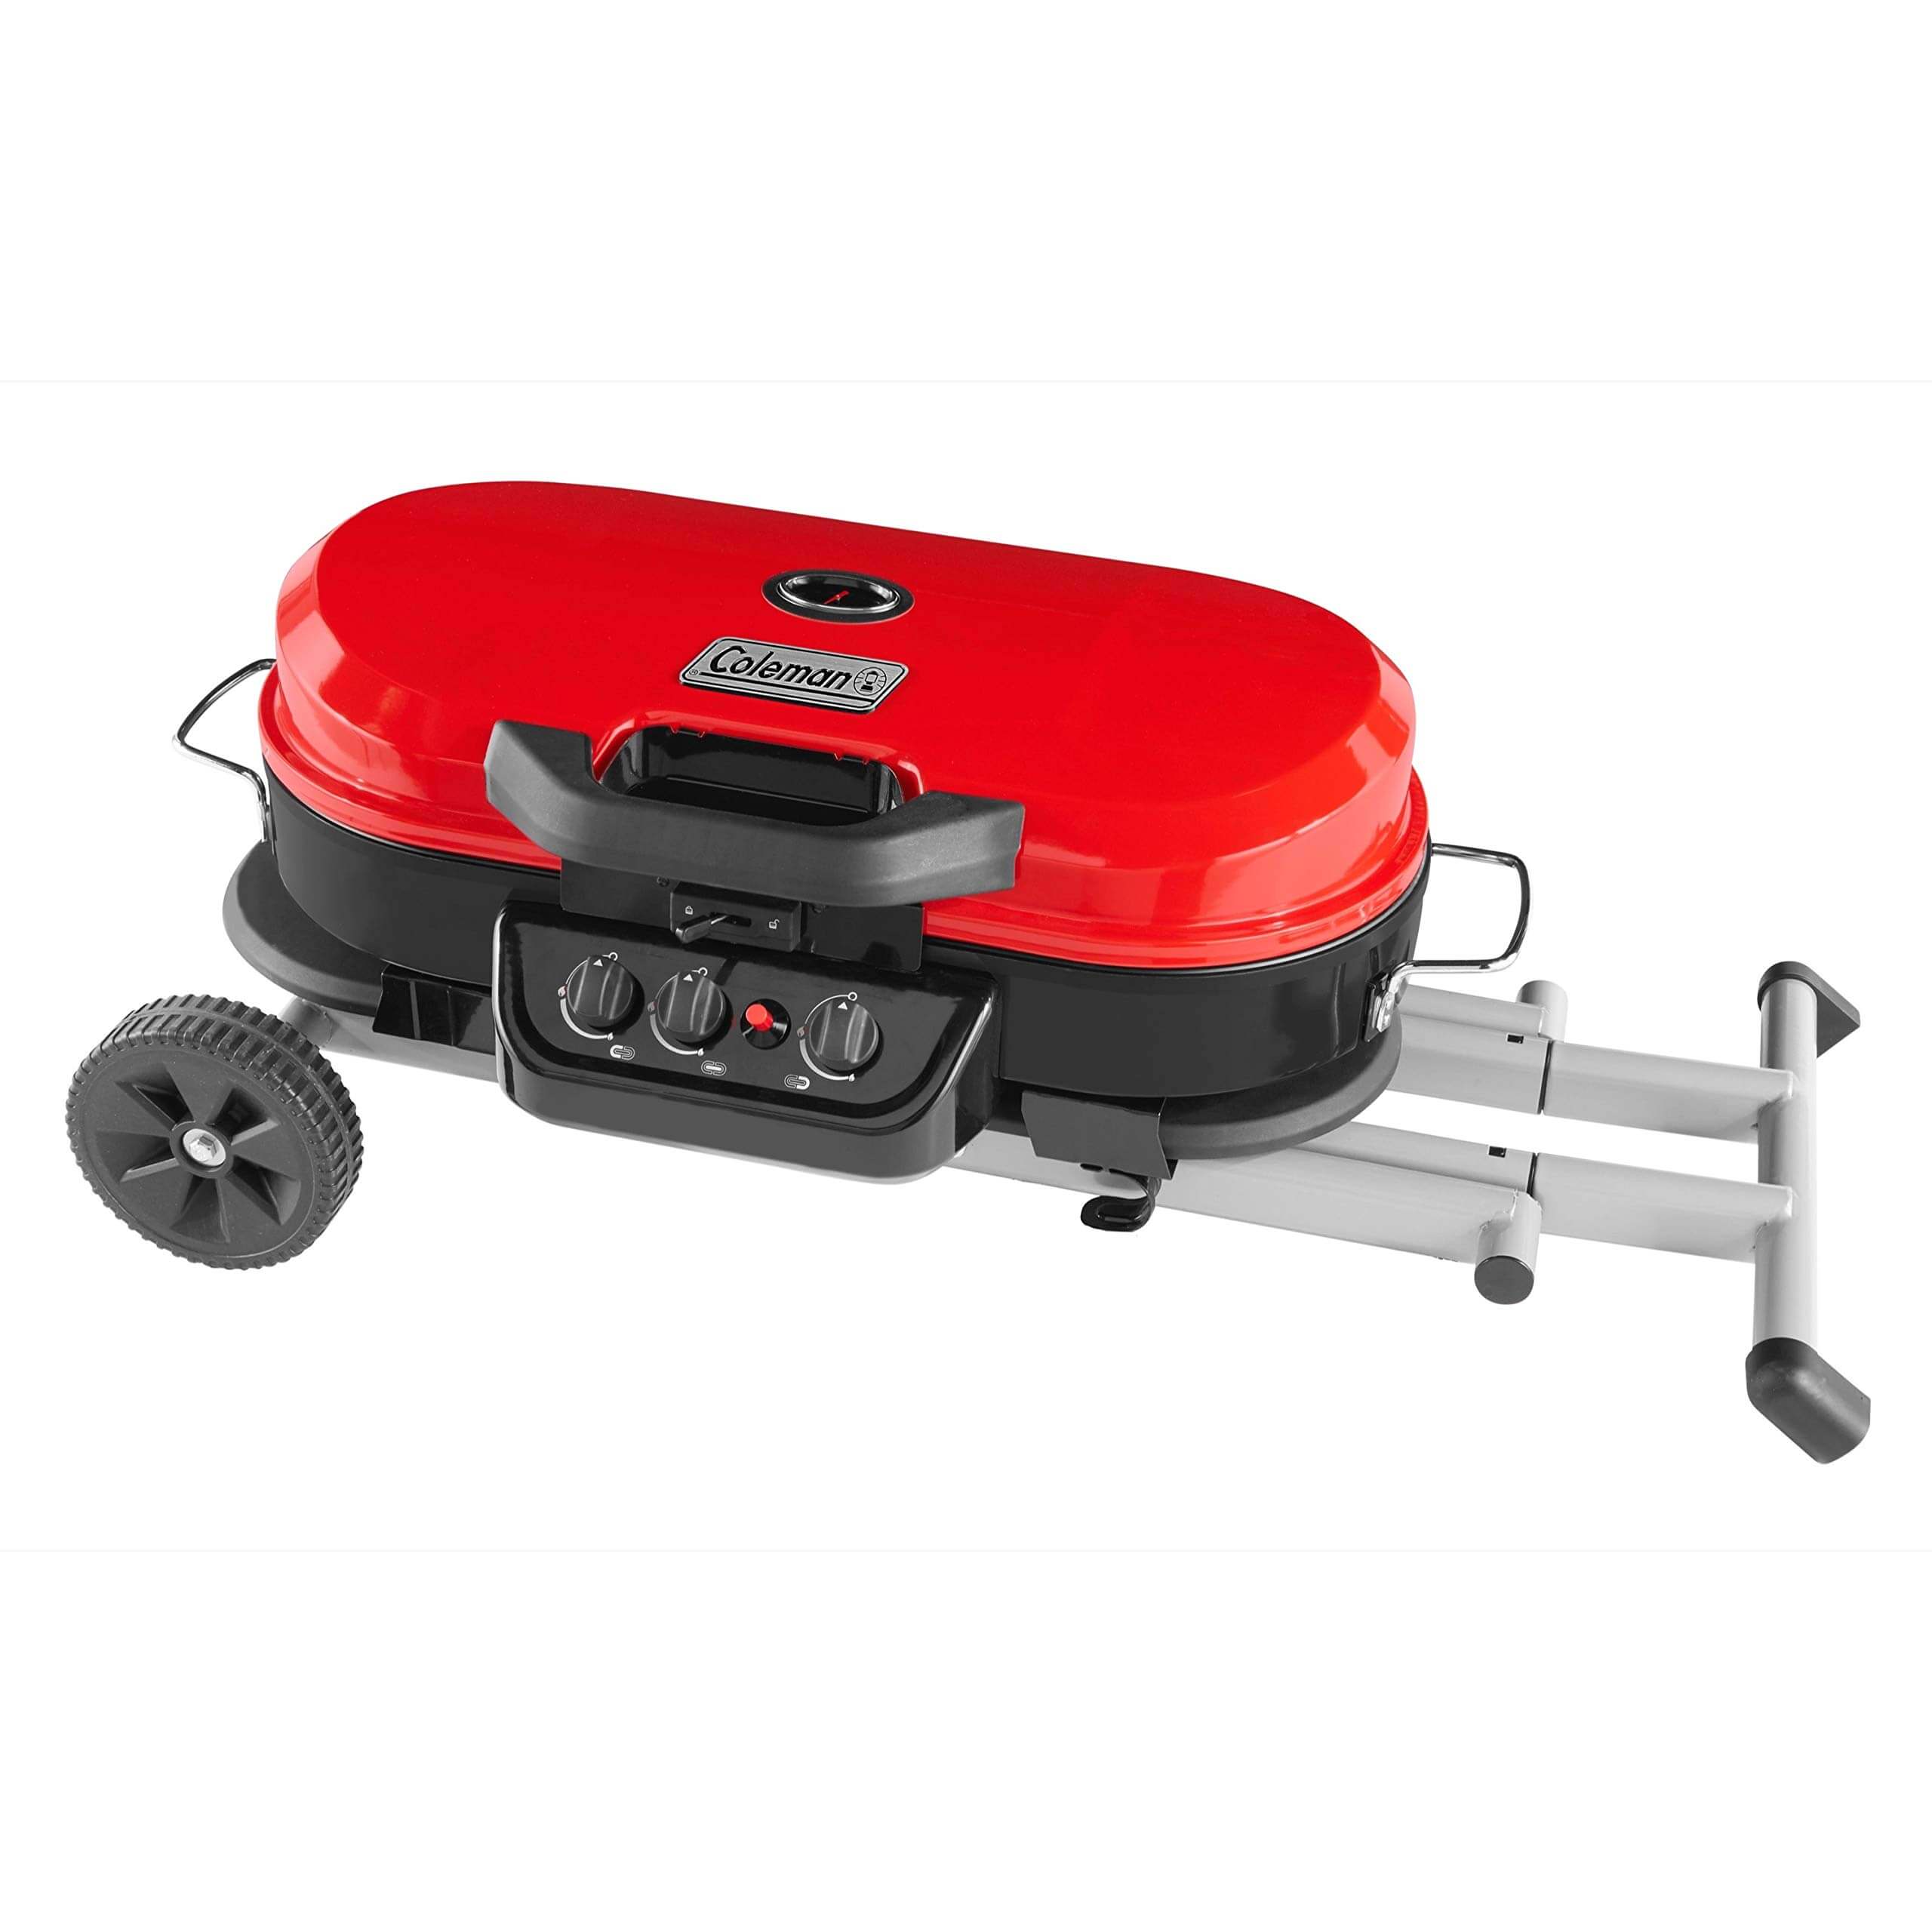 coleman camping grill, best gas grills under $500, coleman gas grill for home grilling